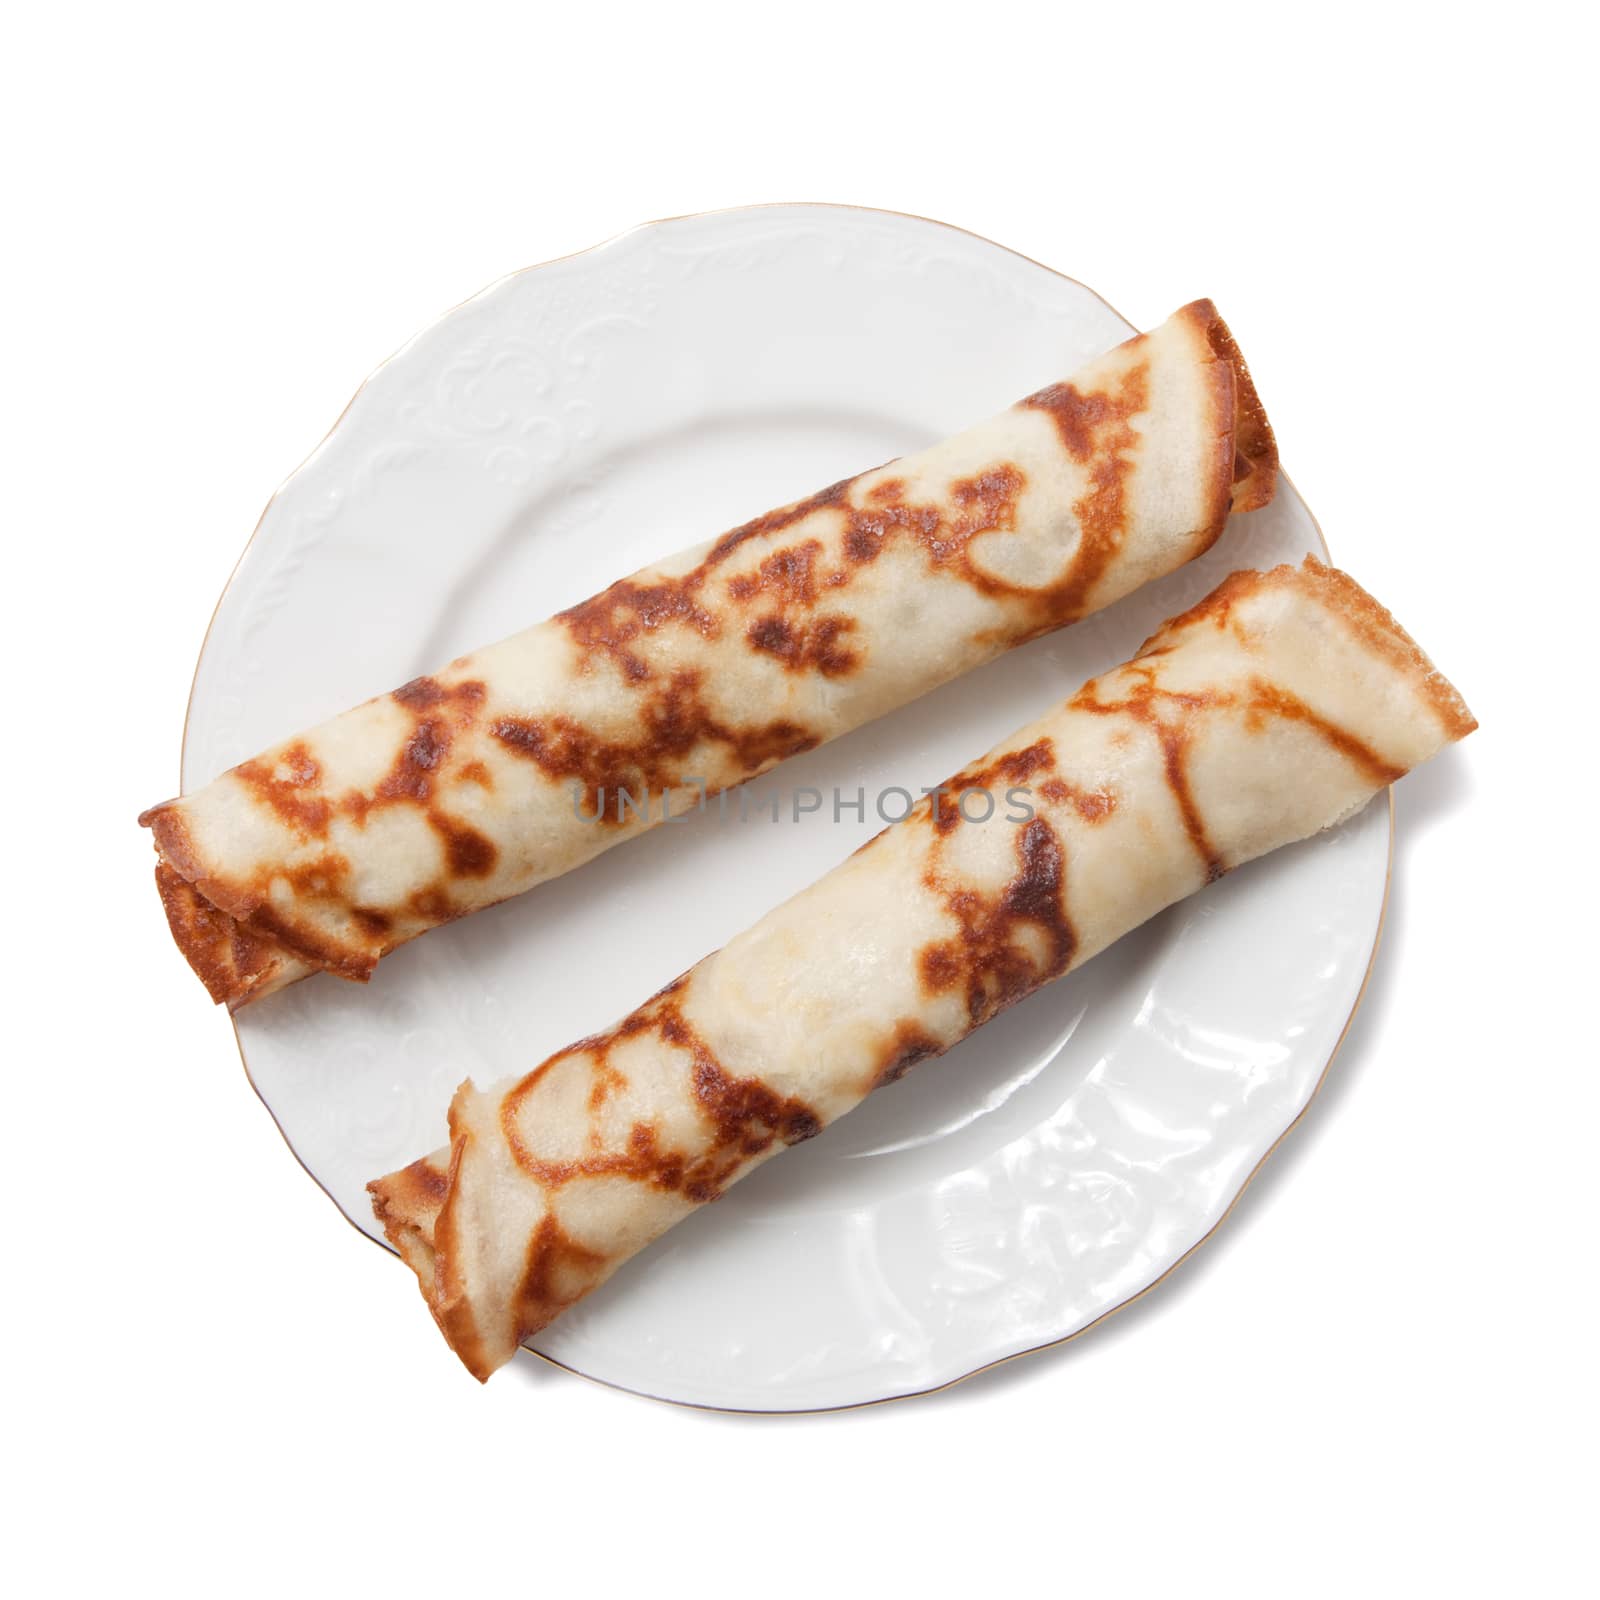 Two rolled pancakes on a plate isolated over white